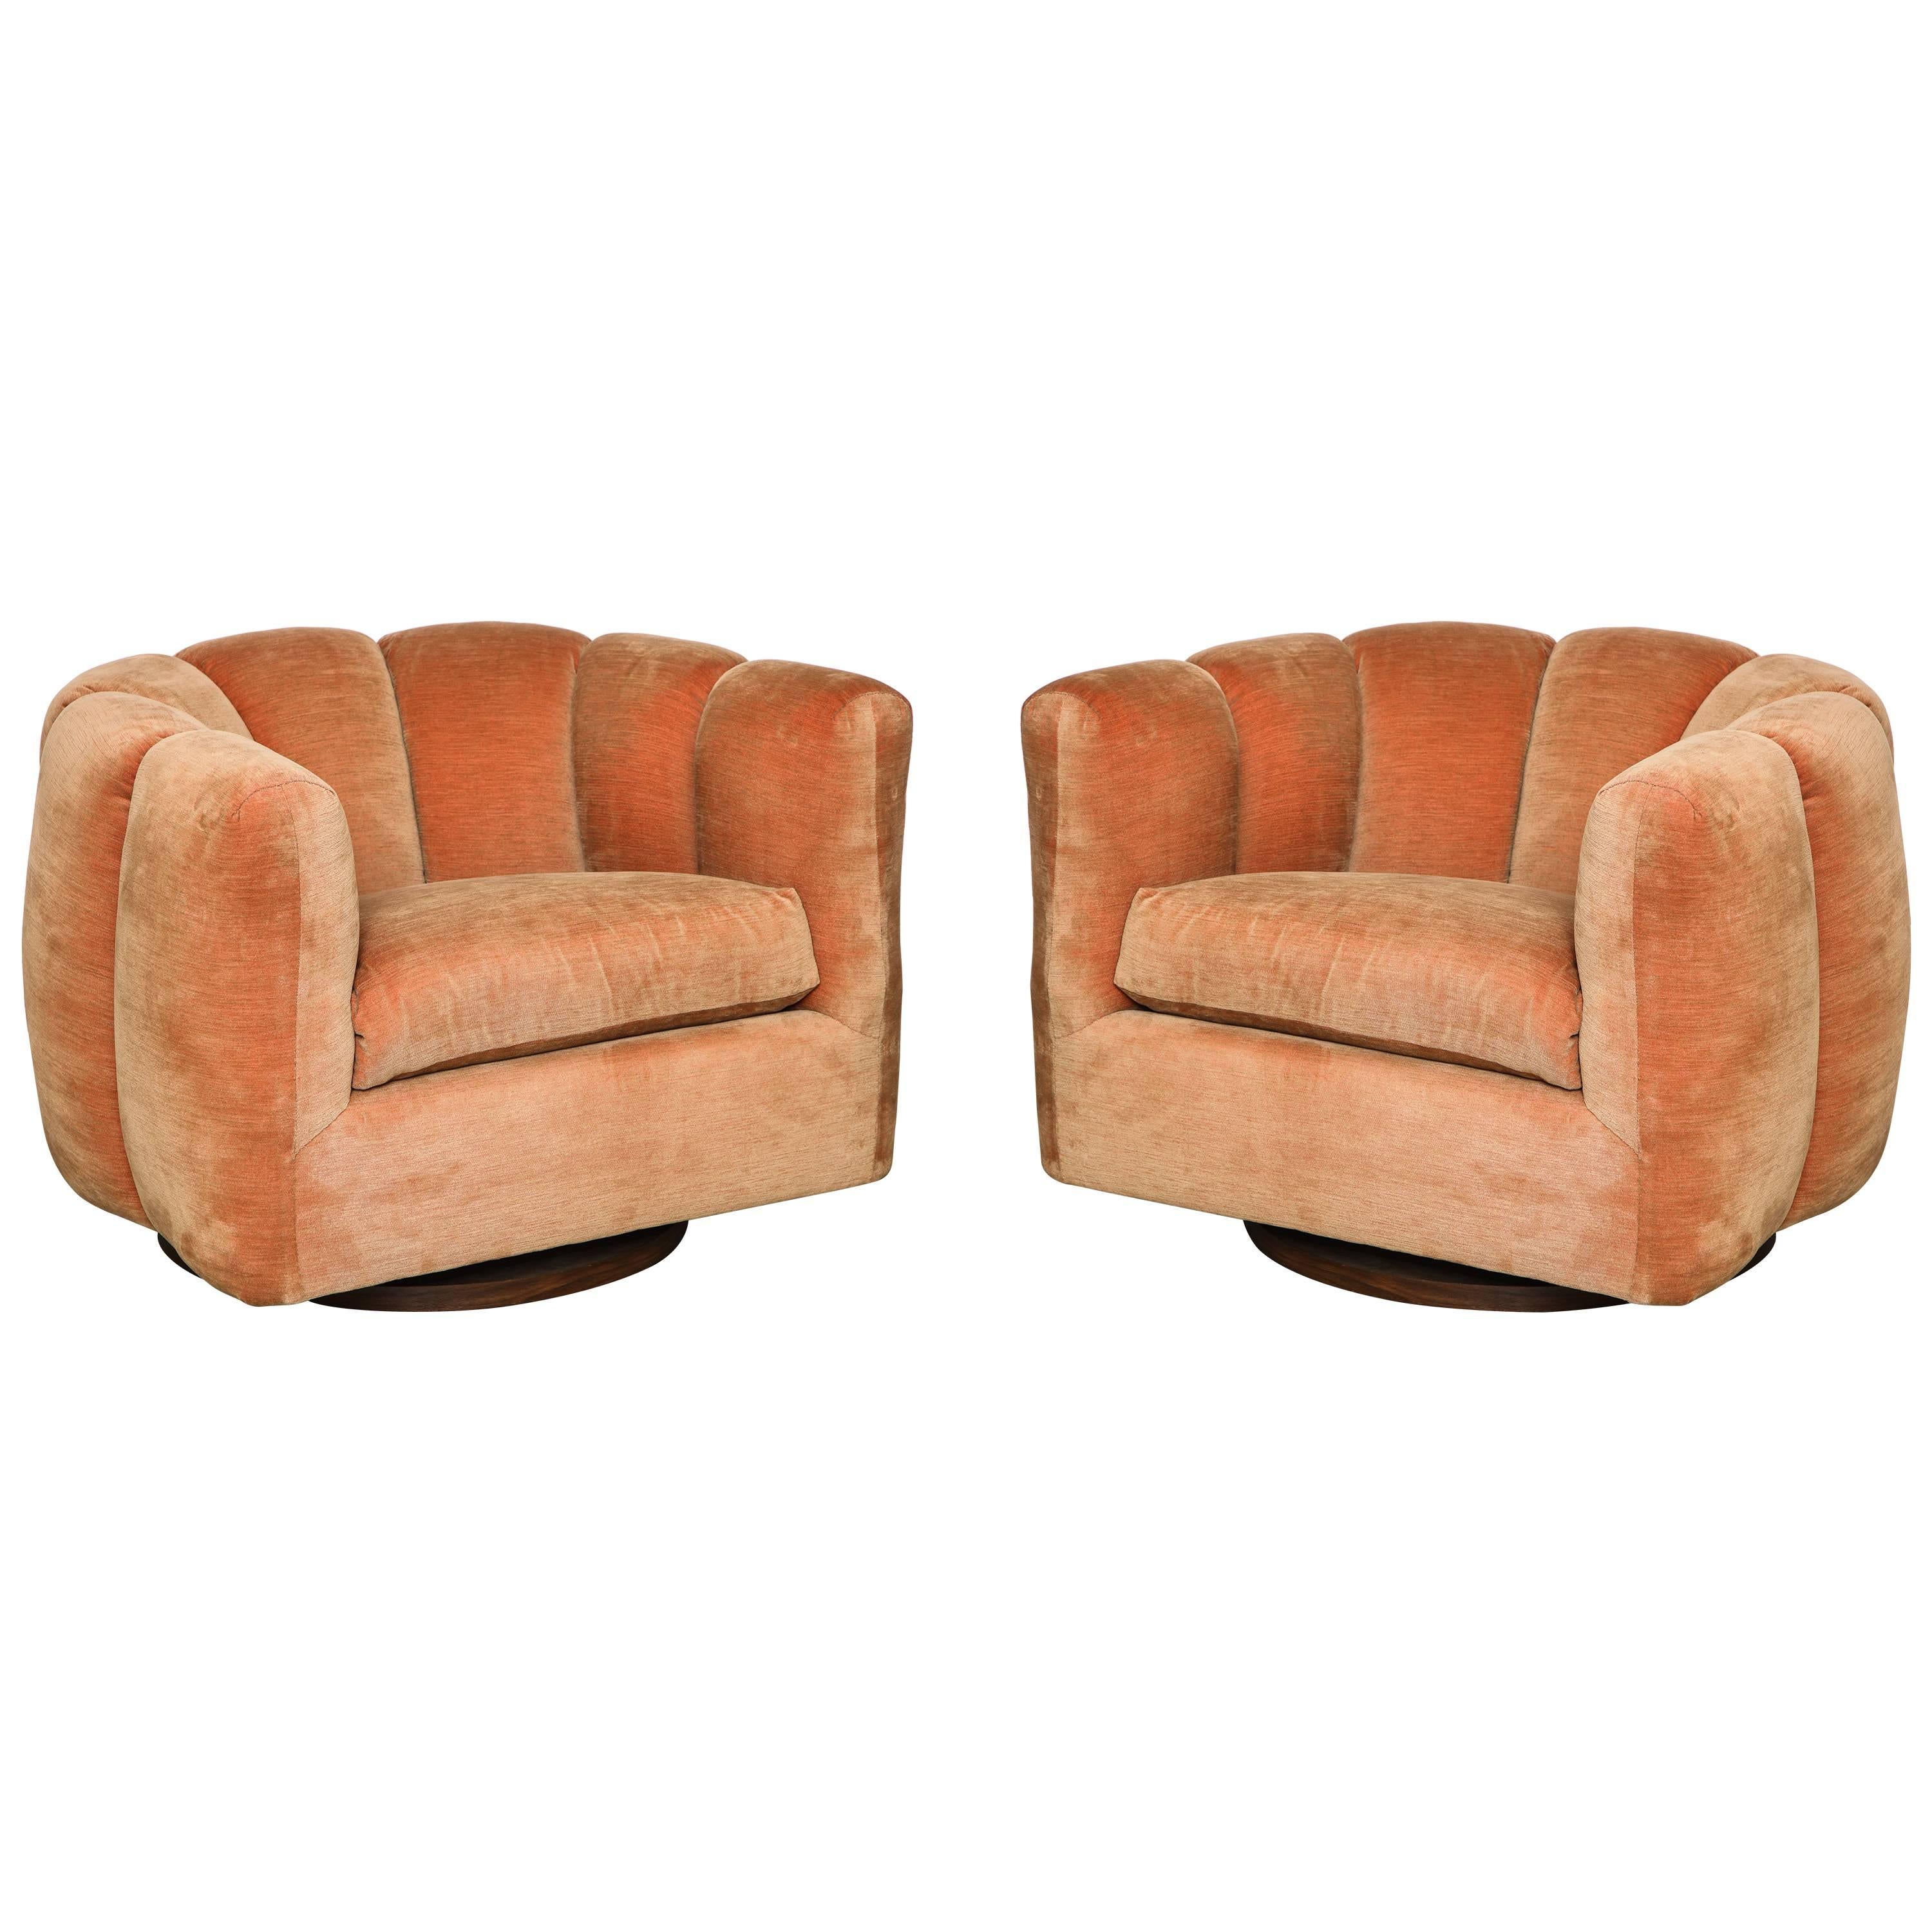 Pair of Swivel Tufted Armchairs, attributed to Milo Baughman